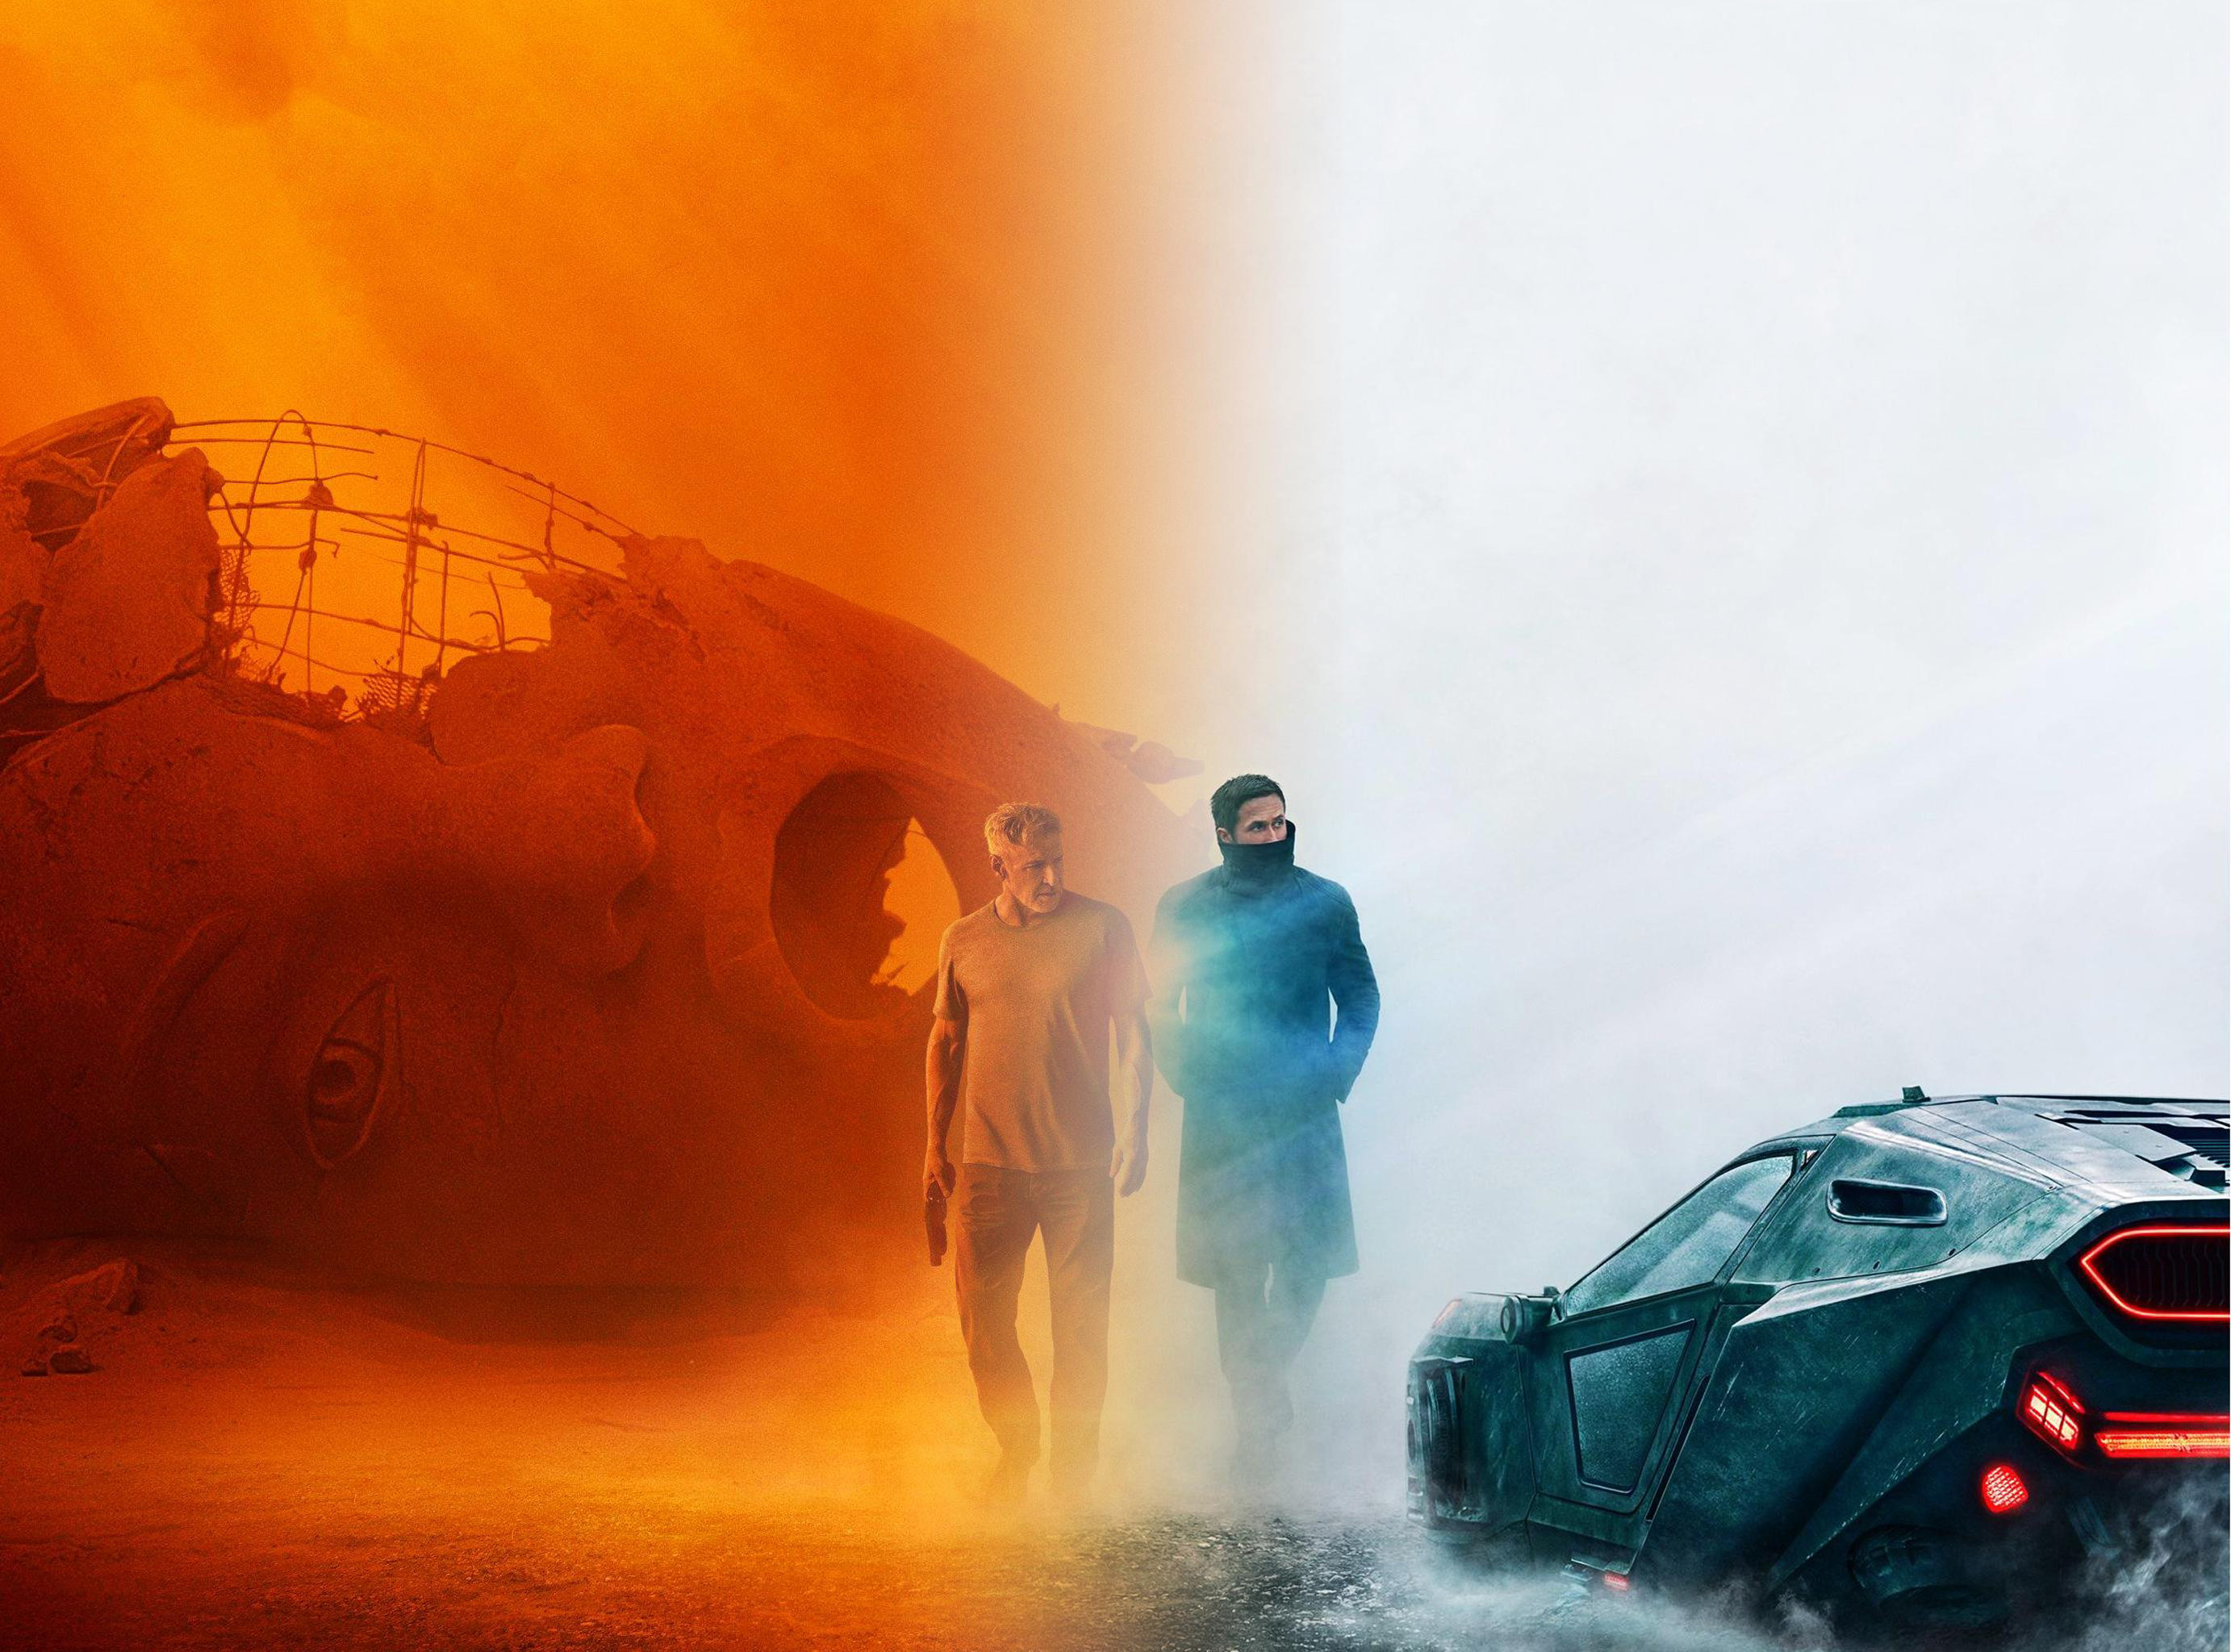 Blade Runner 2049 Movie, HD Movies, 4k Wallpapers, Images, Backgrounds